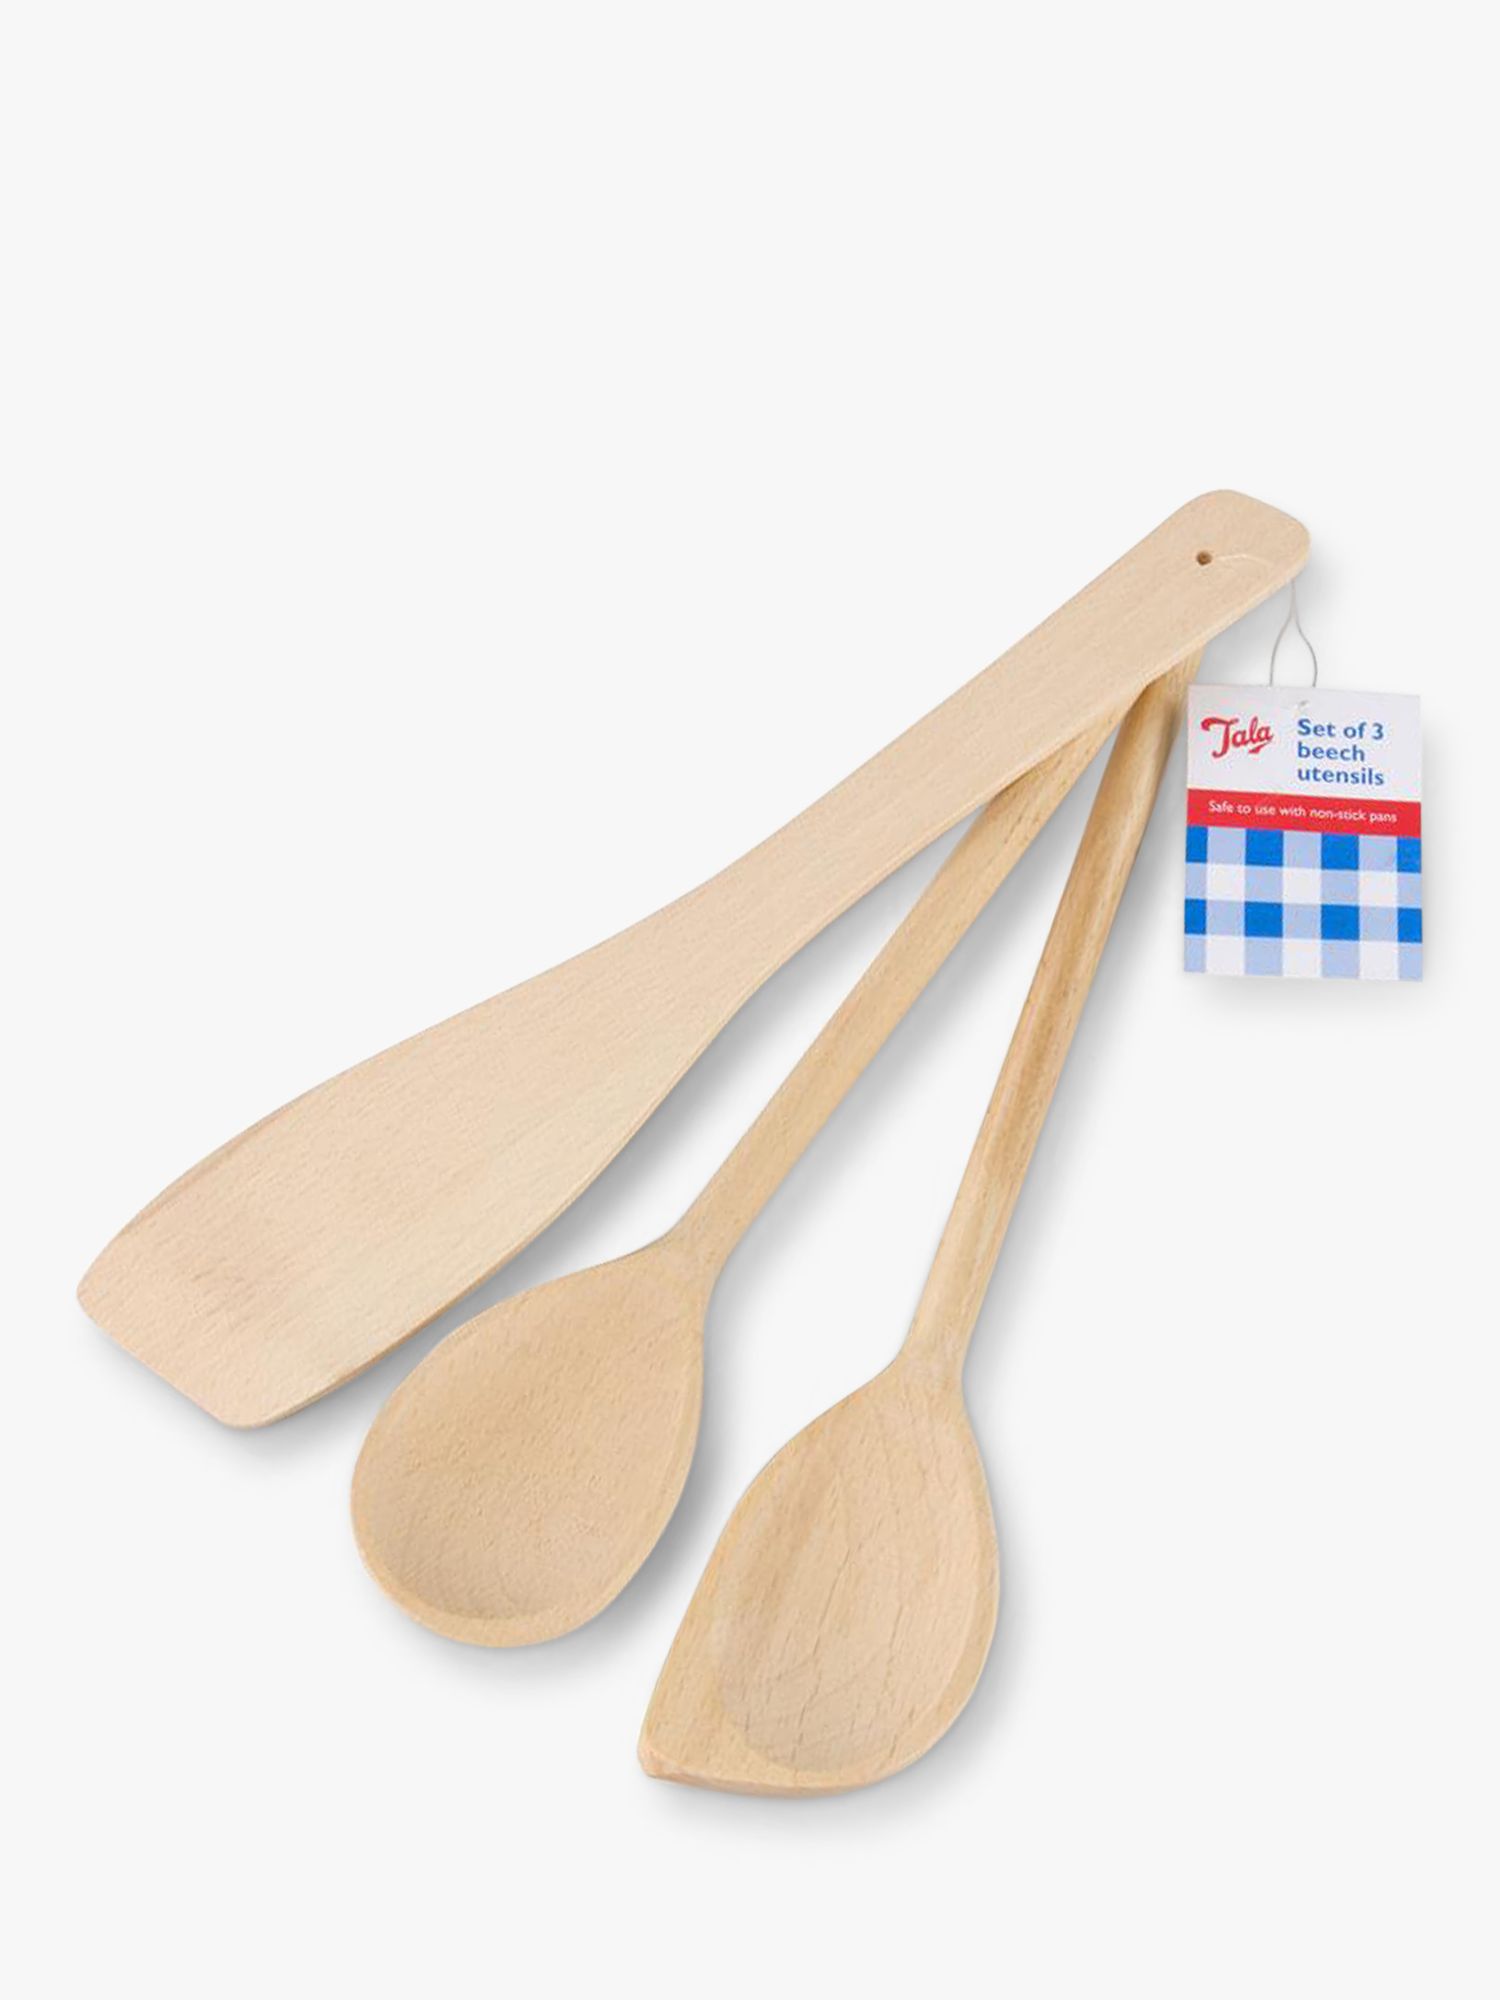 John Lewis ANYDAY Silicone Baking Utensils, Set of 4, Assorted